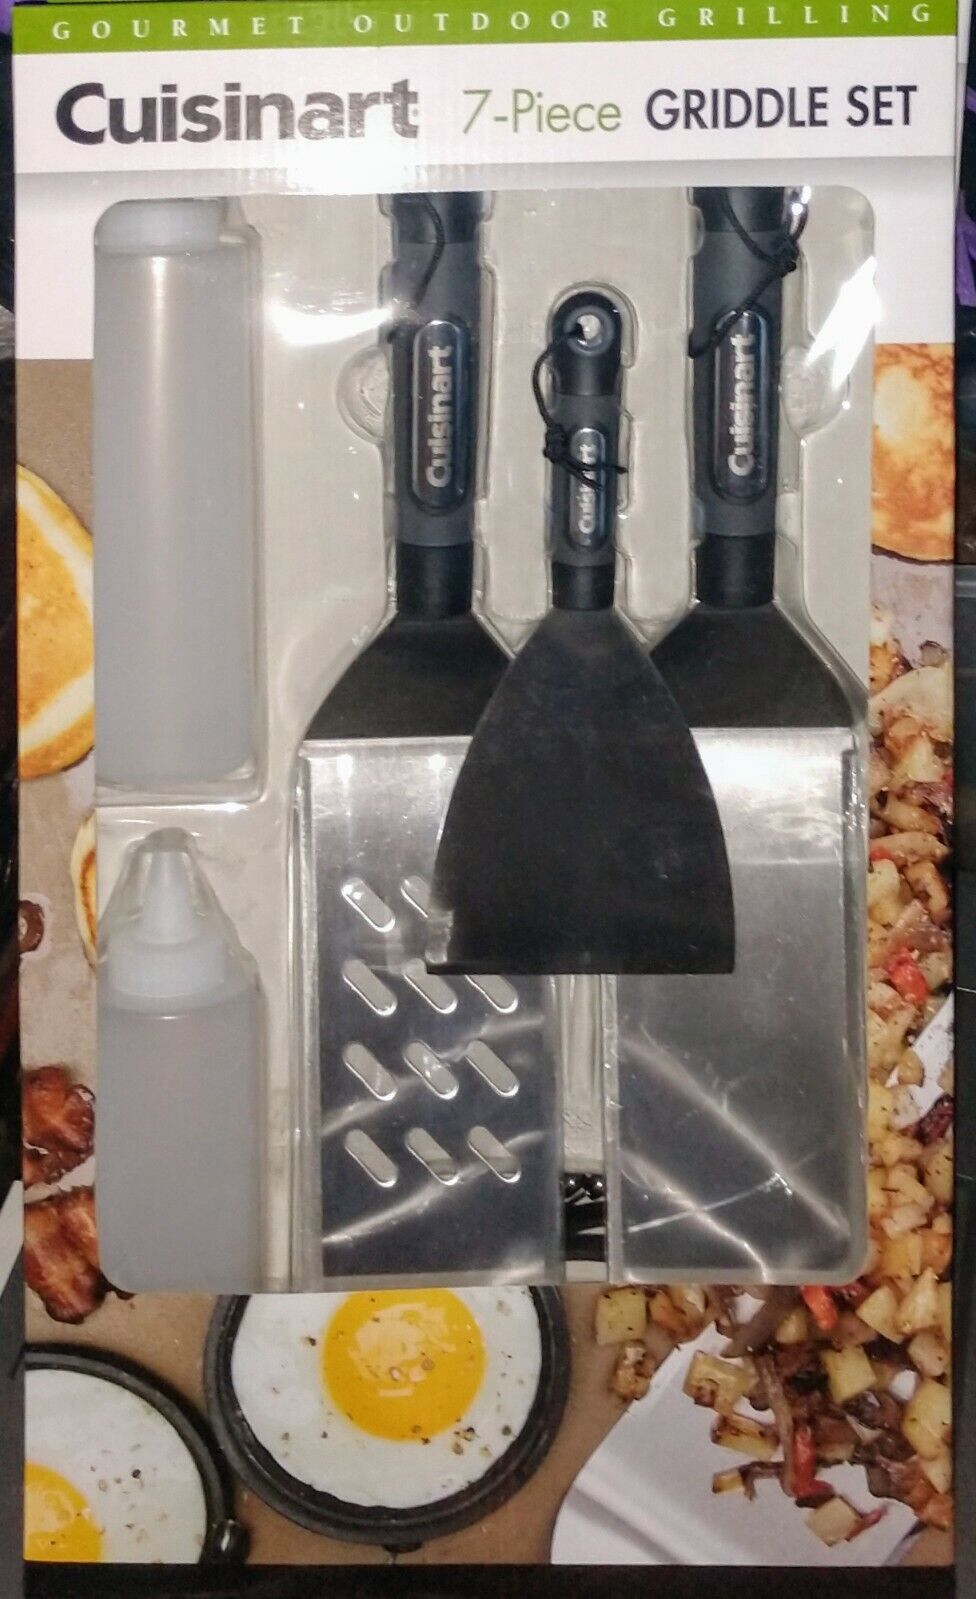 Cuisinart BBQ Tool Set 7 Piece Outdoor Griddle Grilling & Cooking Brand new - $19.99